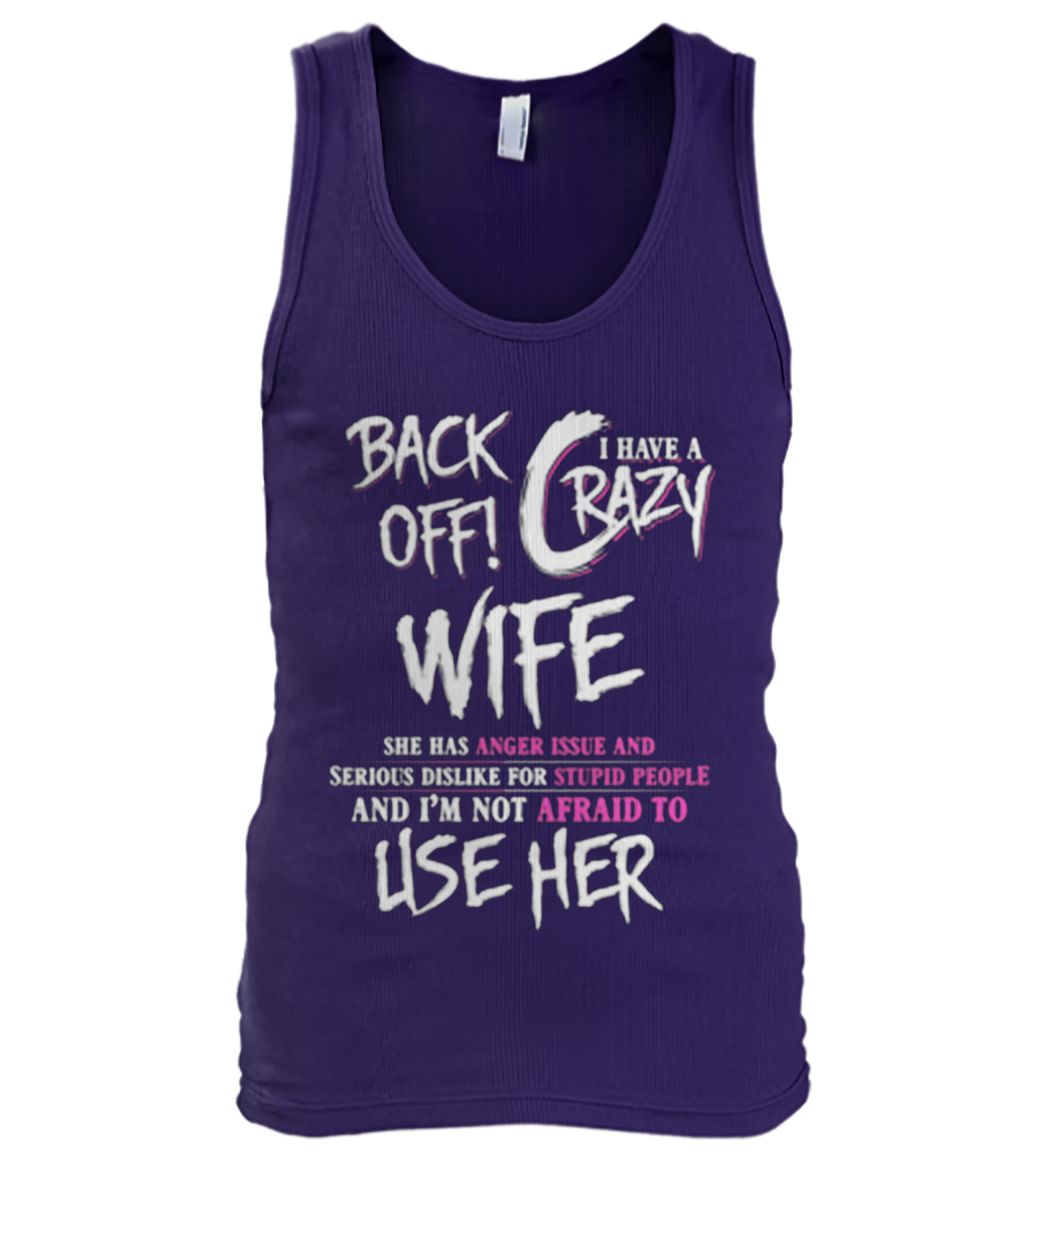 Back off I have a crazy sister she has anger issues men's tank top